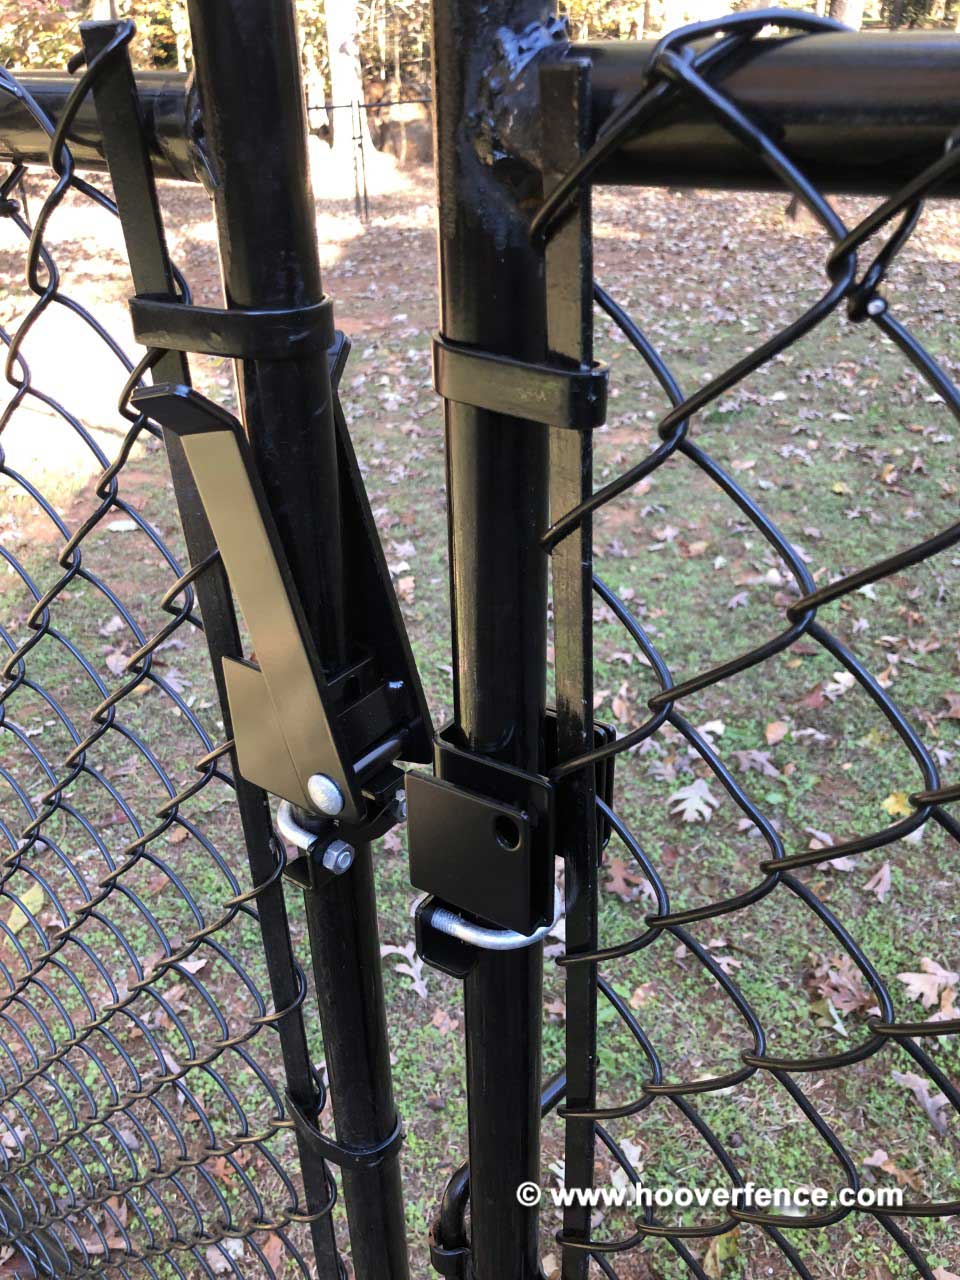 Customer Install - DAC-4138-B Installed on Black Chain Link Fence Double Swing Gate